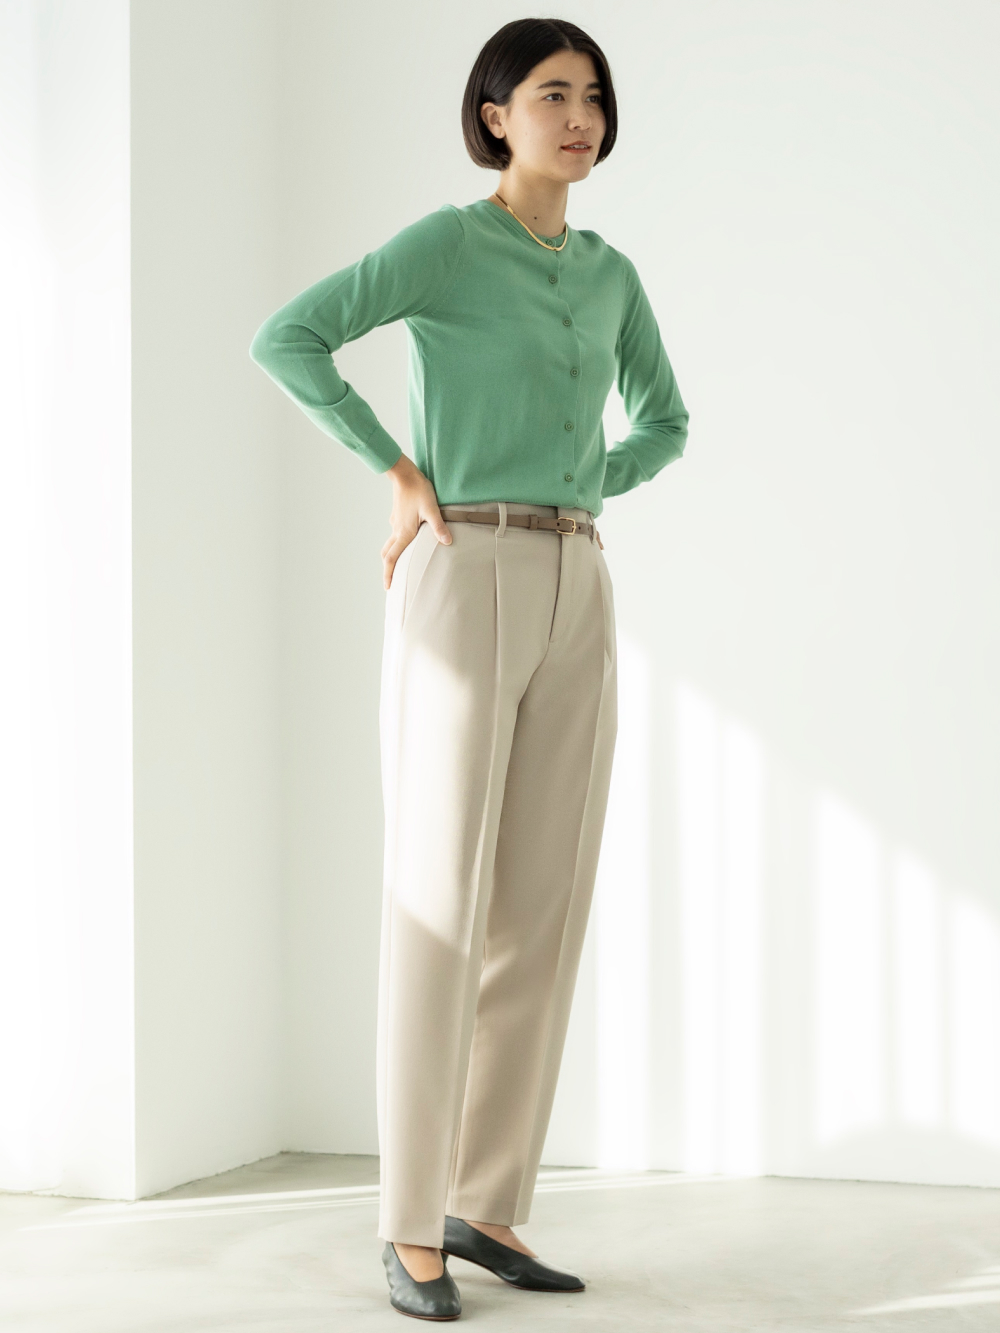 Check styling ideas for「Rayon Short-Sleeve Blouse、Wide Straight